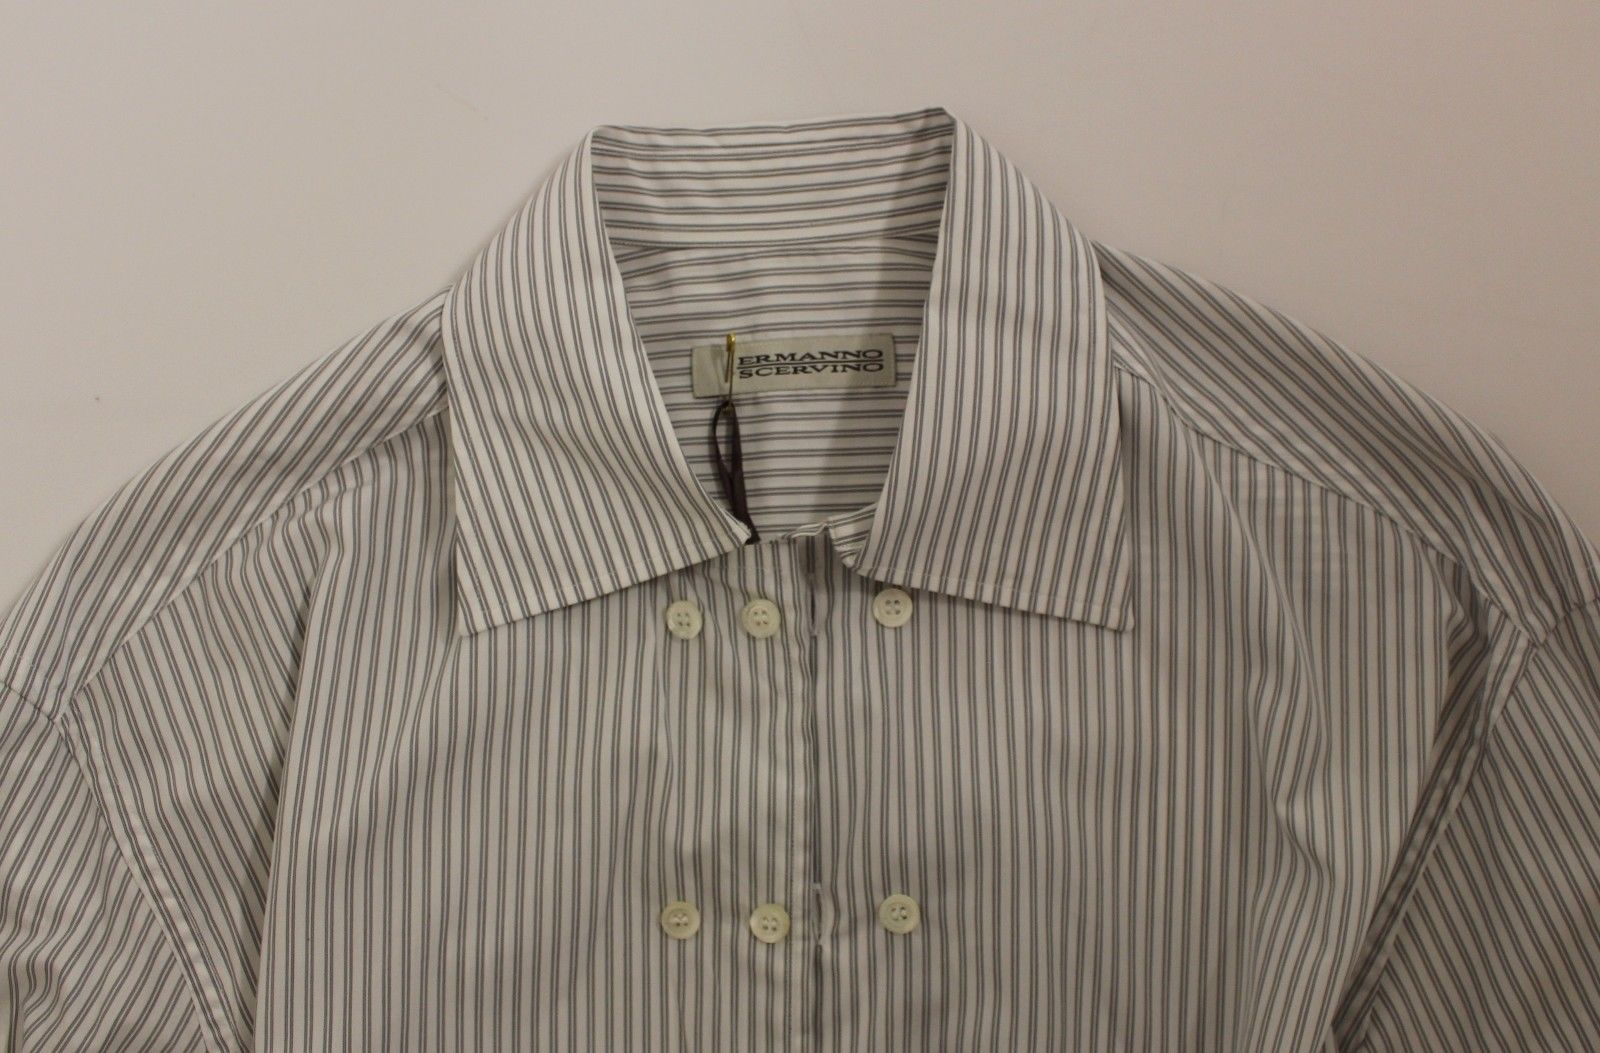 Ermanno Scervino White Gray Striped Regular Fit Casual Shirt